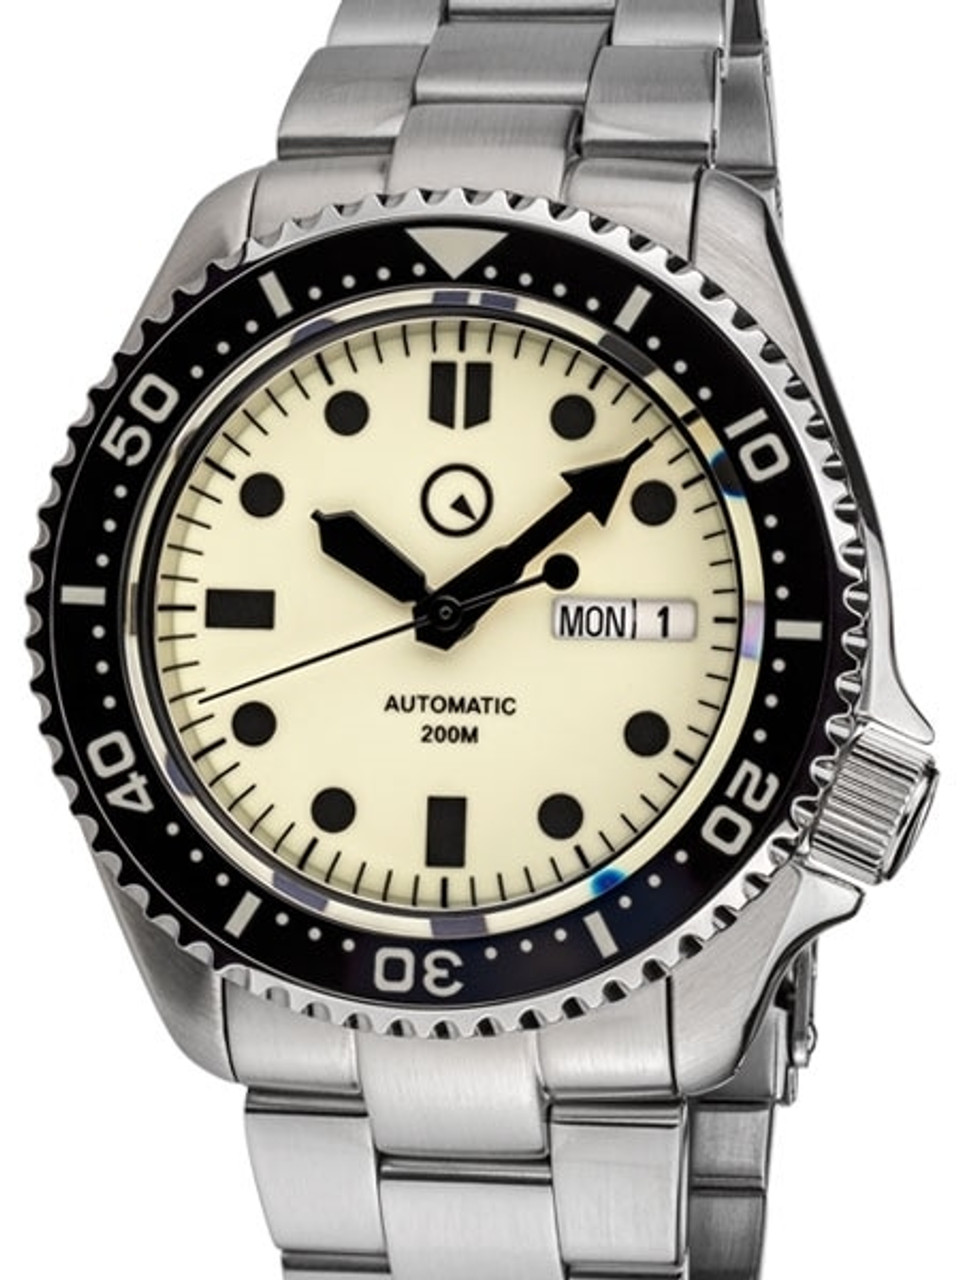 Islander Automatic Dive Watch with AR sapphire crystal, all solid link bracelet, Luminous ceramic bezel insert, fully luminous dial, and drilled lugs